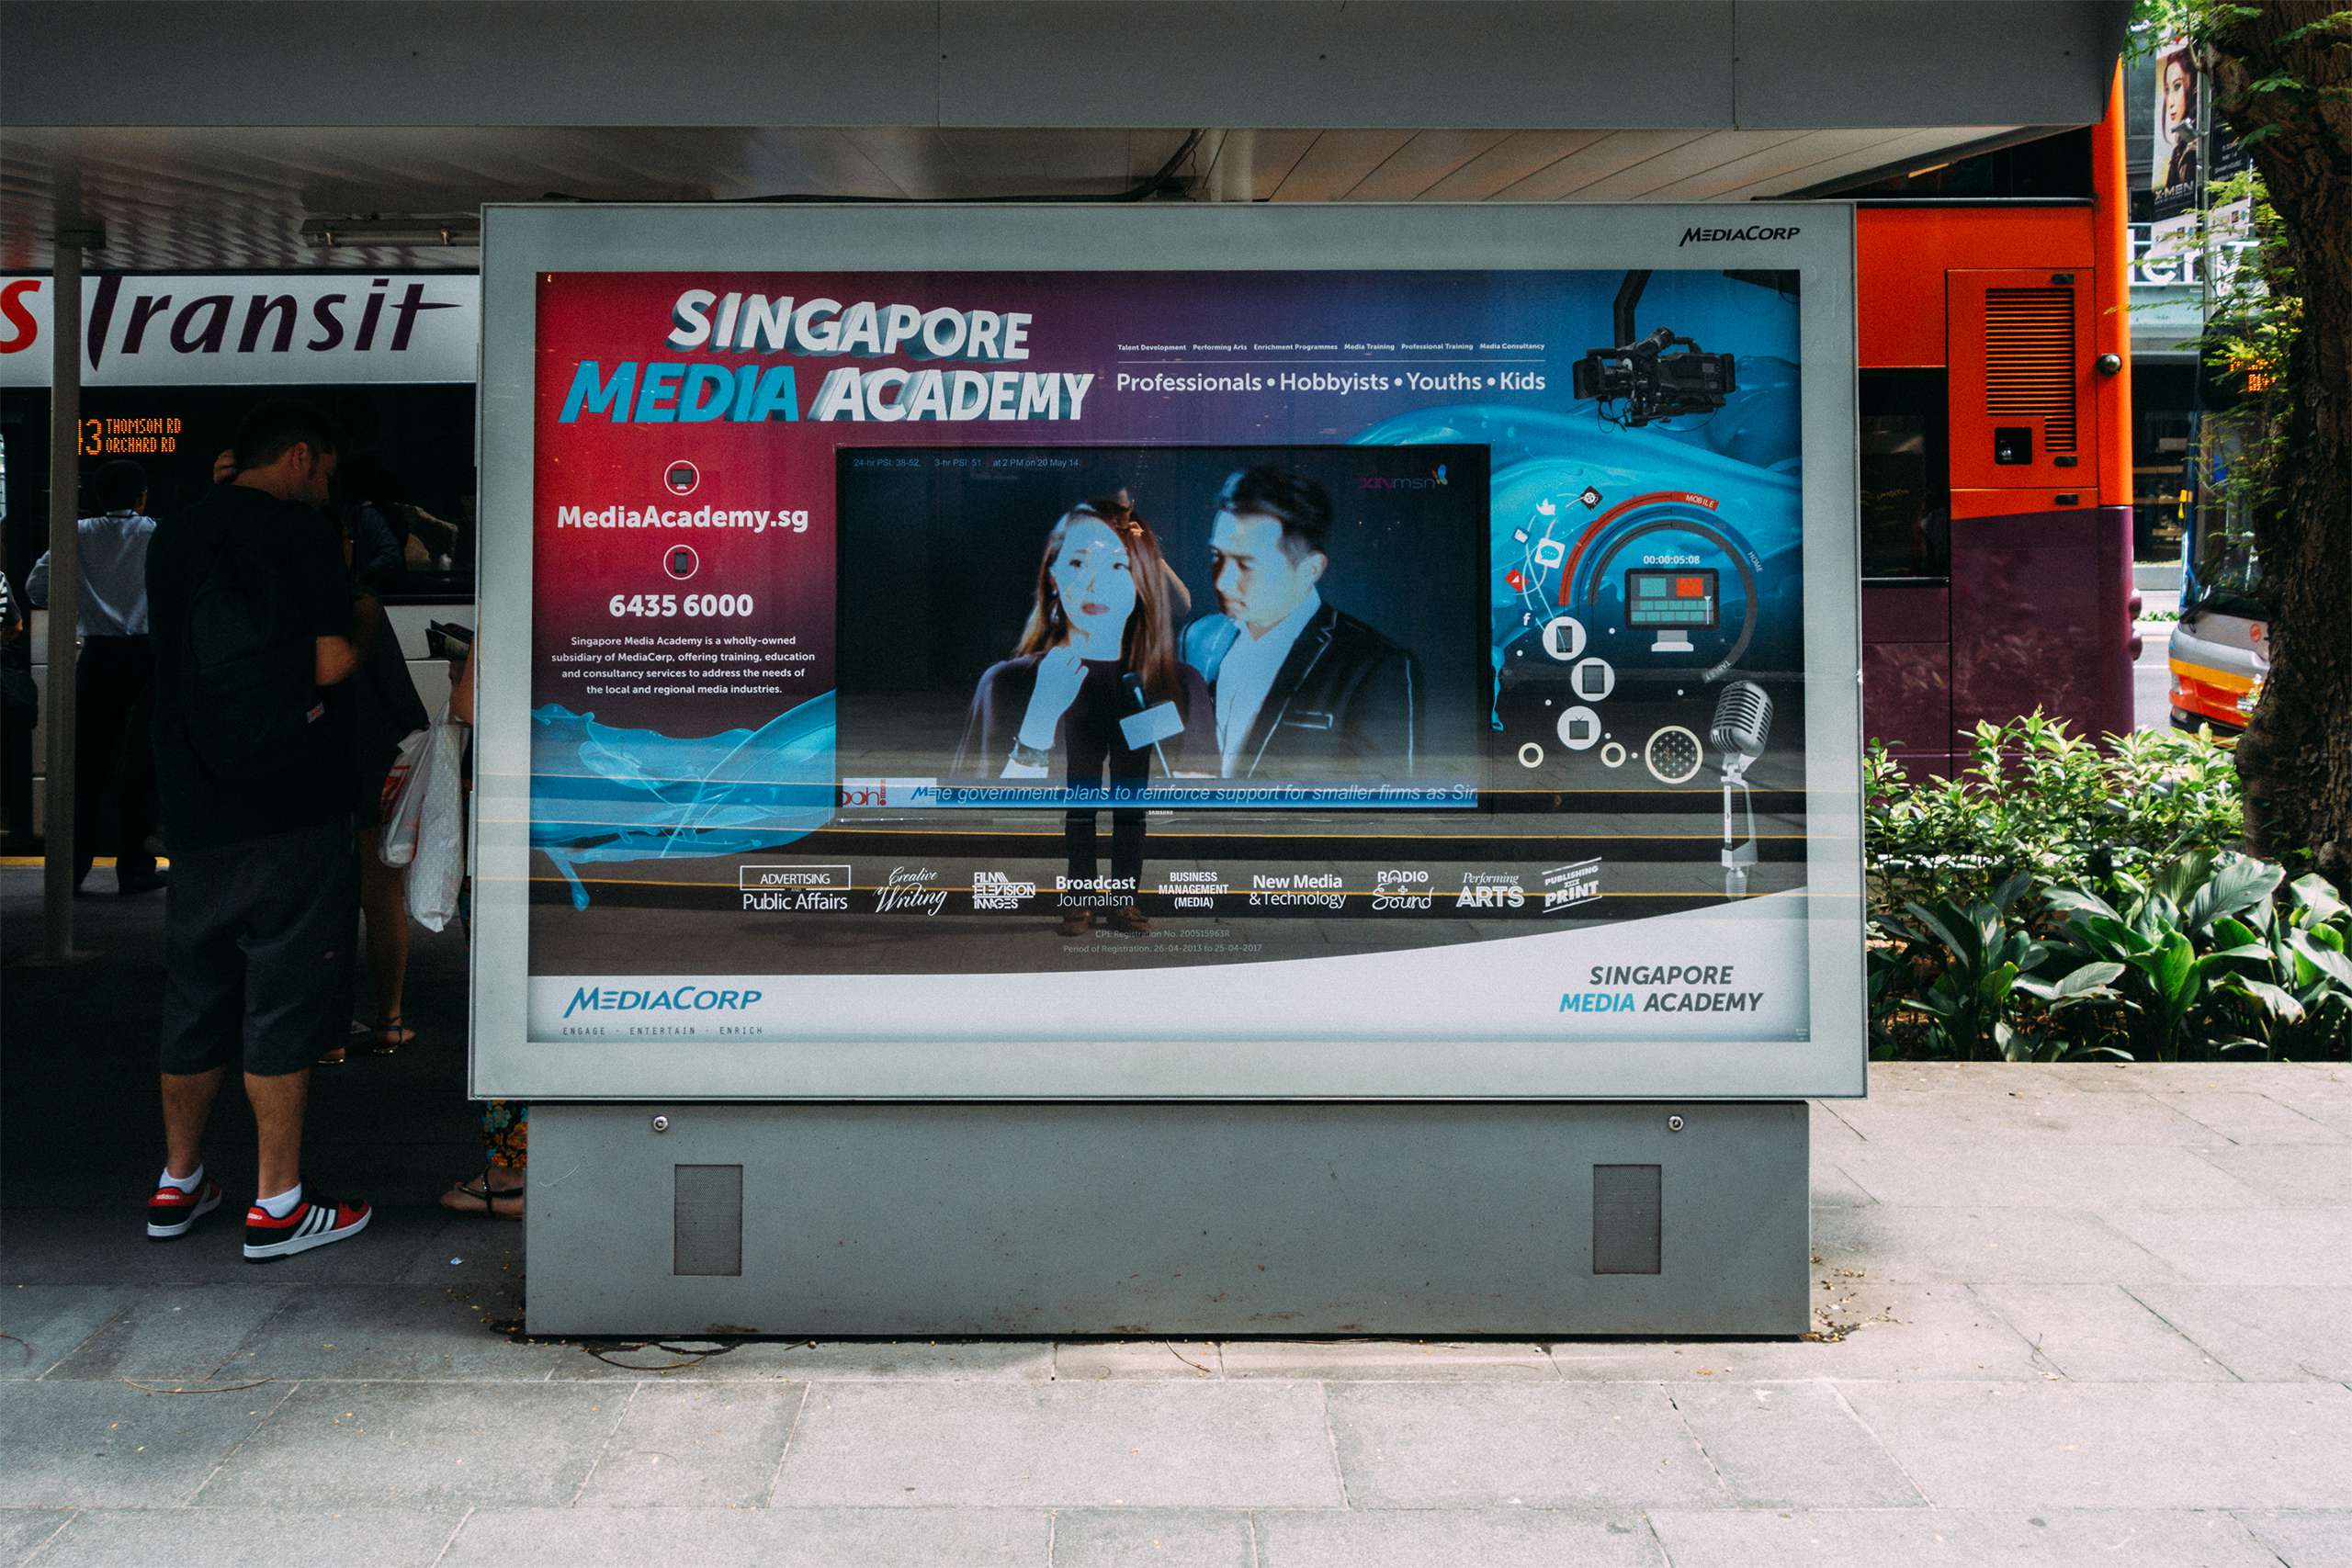 SMA's branding advetisement at bus stop along Orchard Road